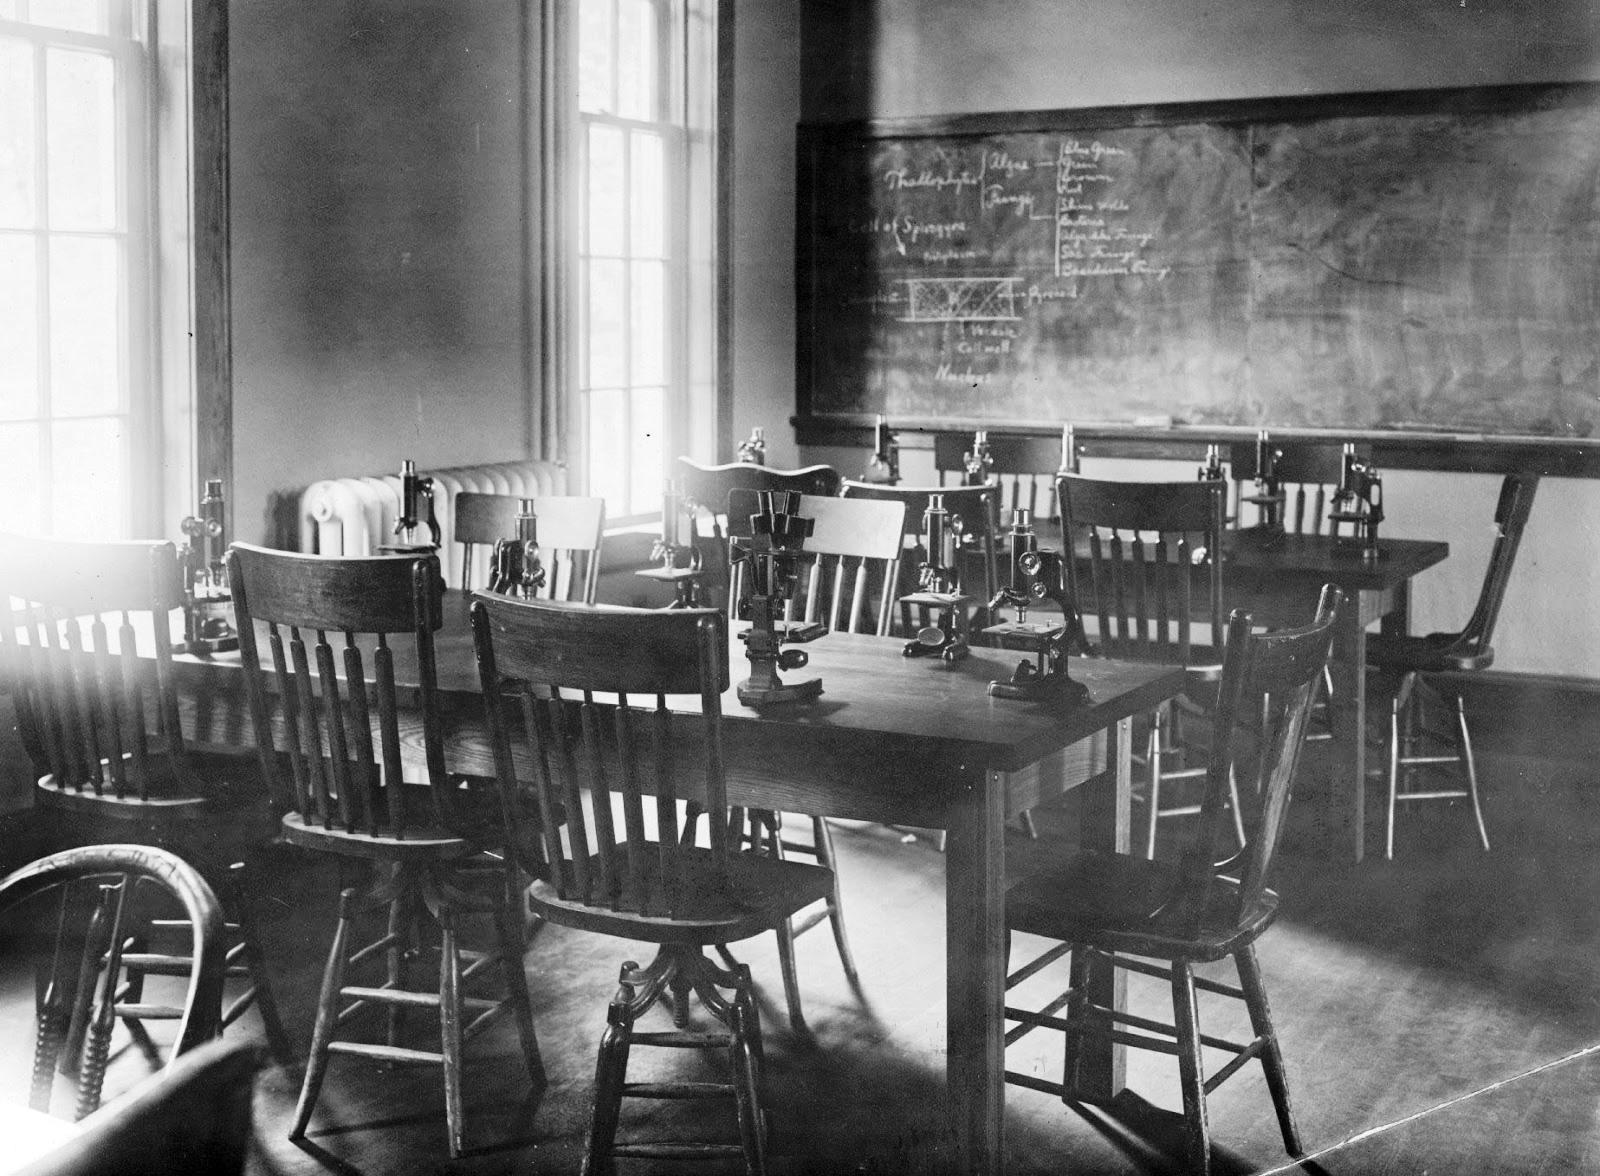 It was remodeled for classes in 1918 due to a report in June of 1917 that described the New Dormitory and the Old Dormitory as "public nuisances." Photo of UK Special Collections. 